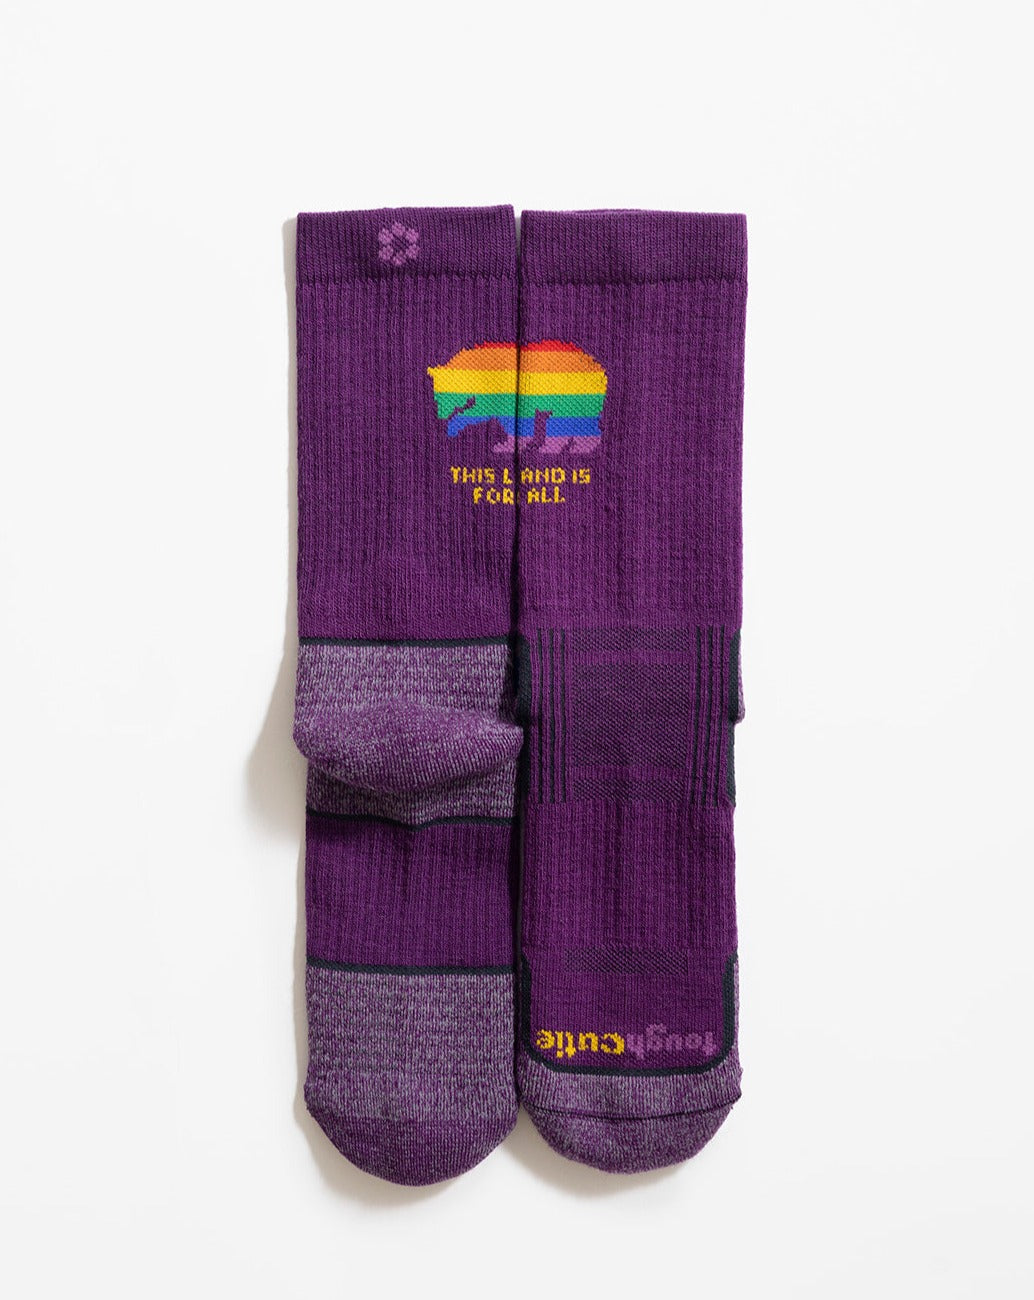 Back and front of pride crew sock